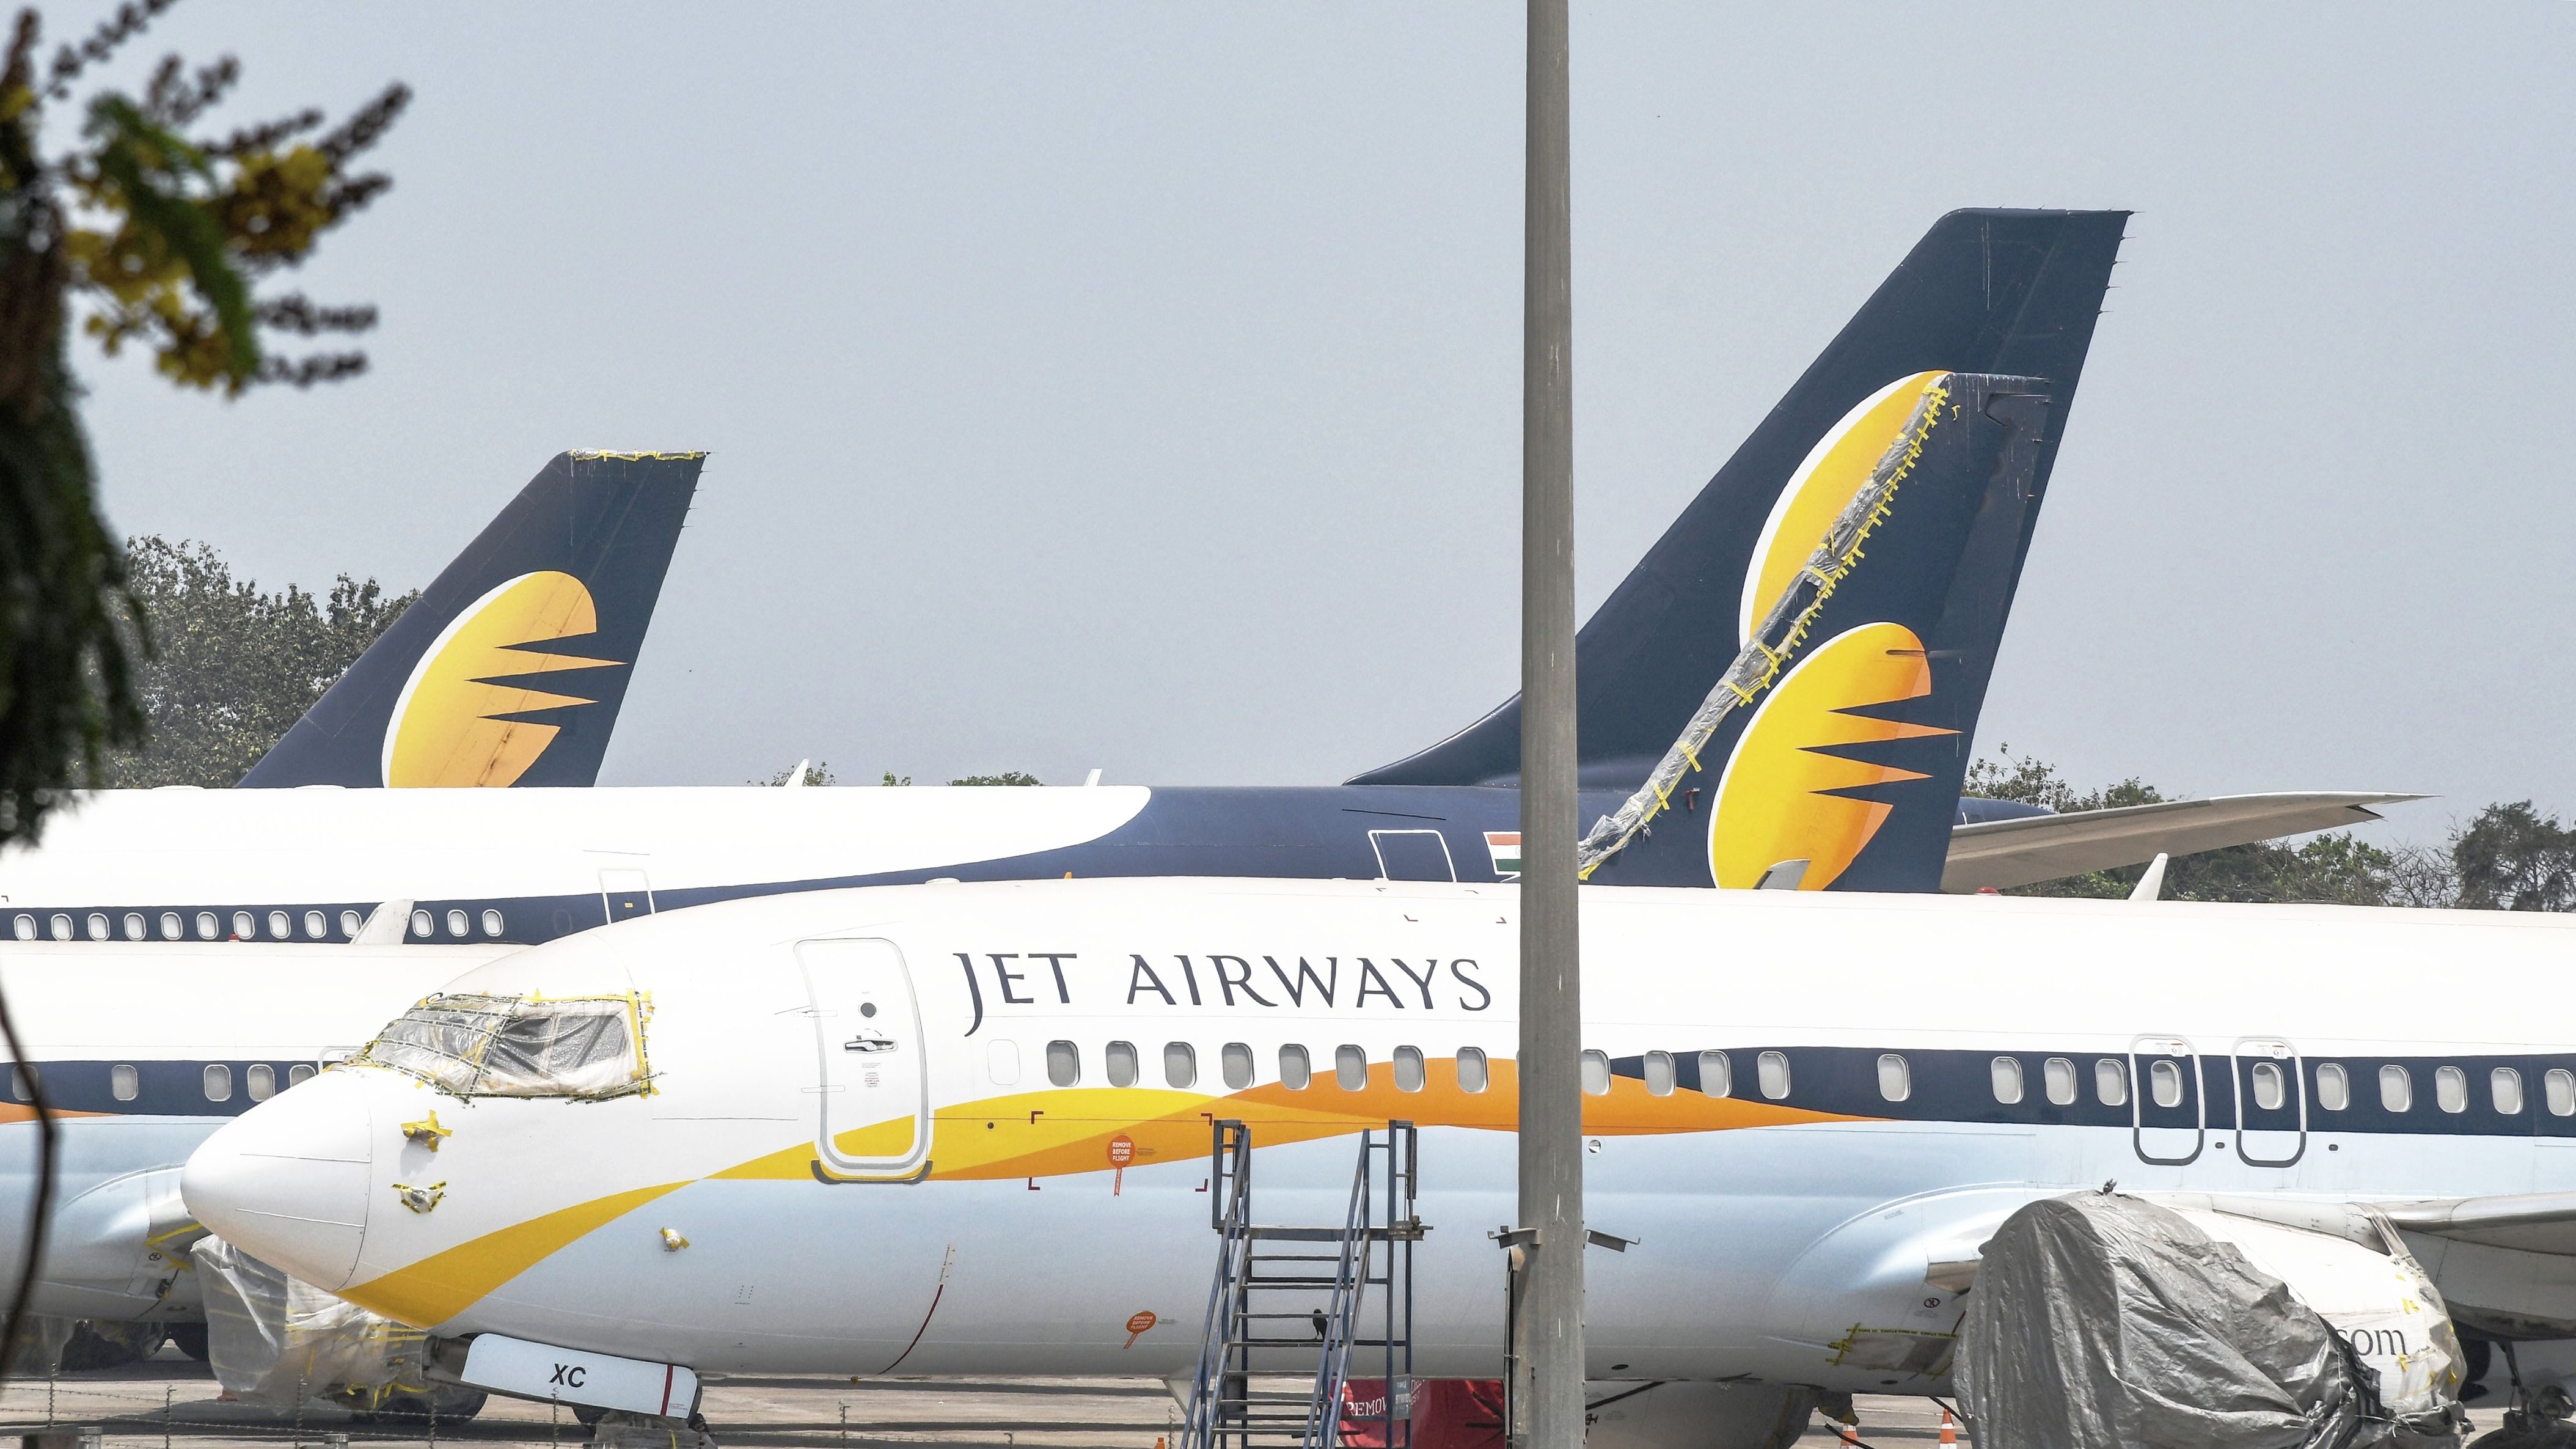 On Monday, the Jet Airways stock closed down nearly 5 per cent, or Rs 2.40, at Rs 46.35 on the BSE. On the NSE, the stock ended at Rs 45.85, down 4.97 per 4 cent, or Rs 2.40.
